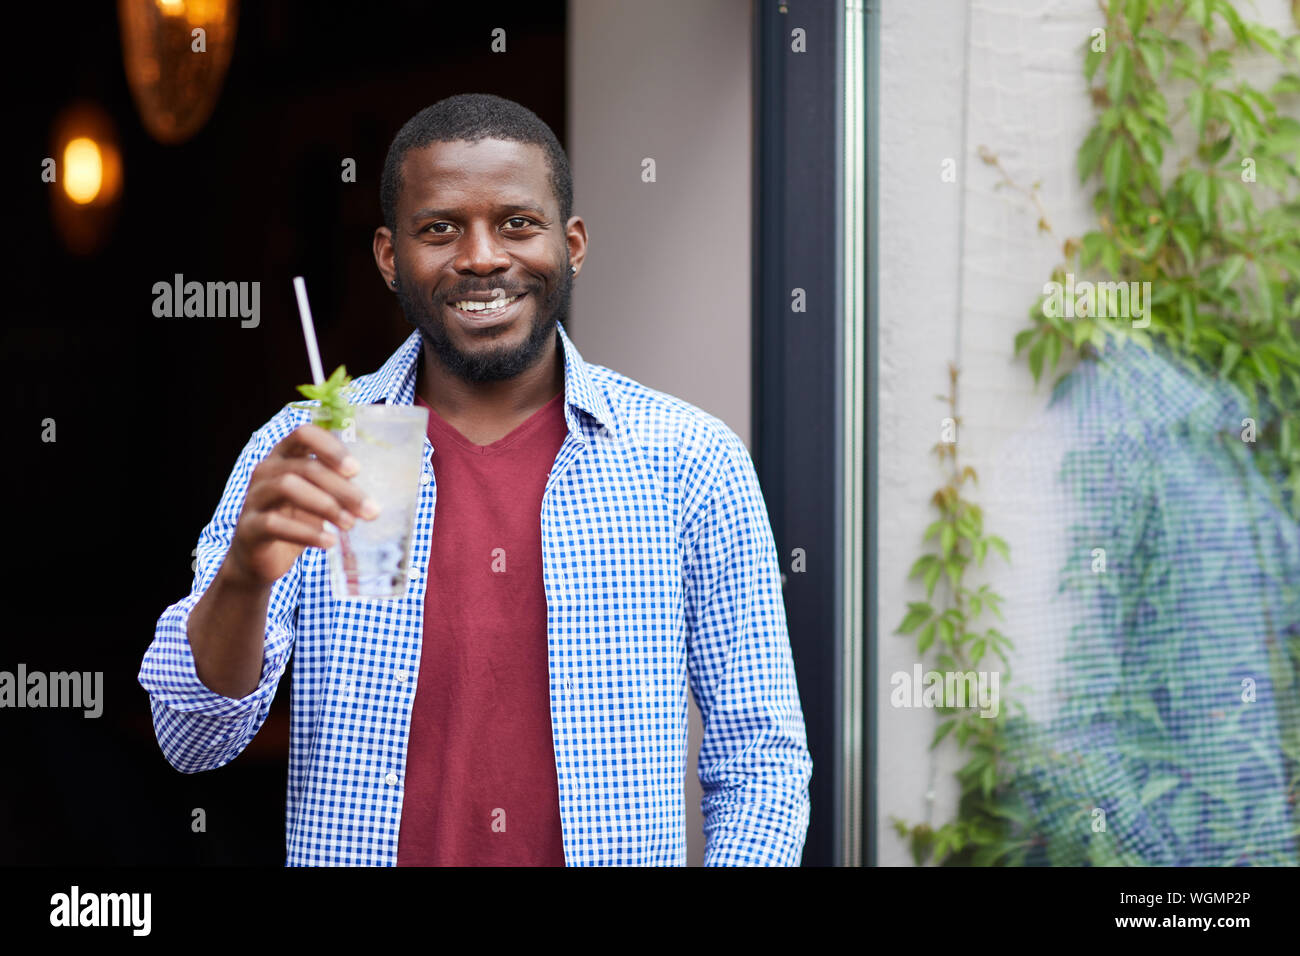 Waist up portrait of smiling African-American man holding cold drink outdoors while posing by cafe, copy space Stock Photo